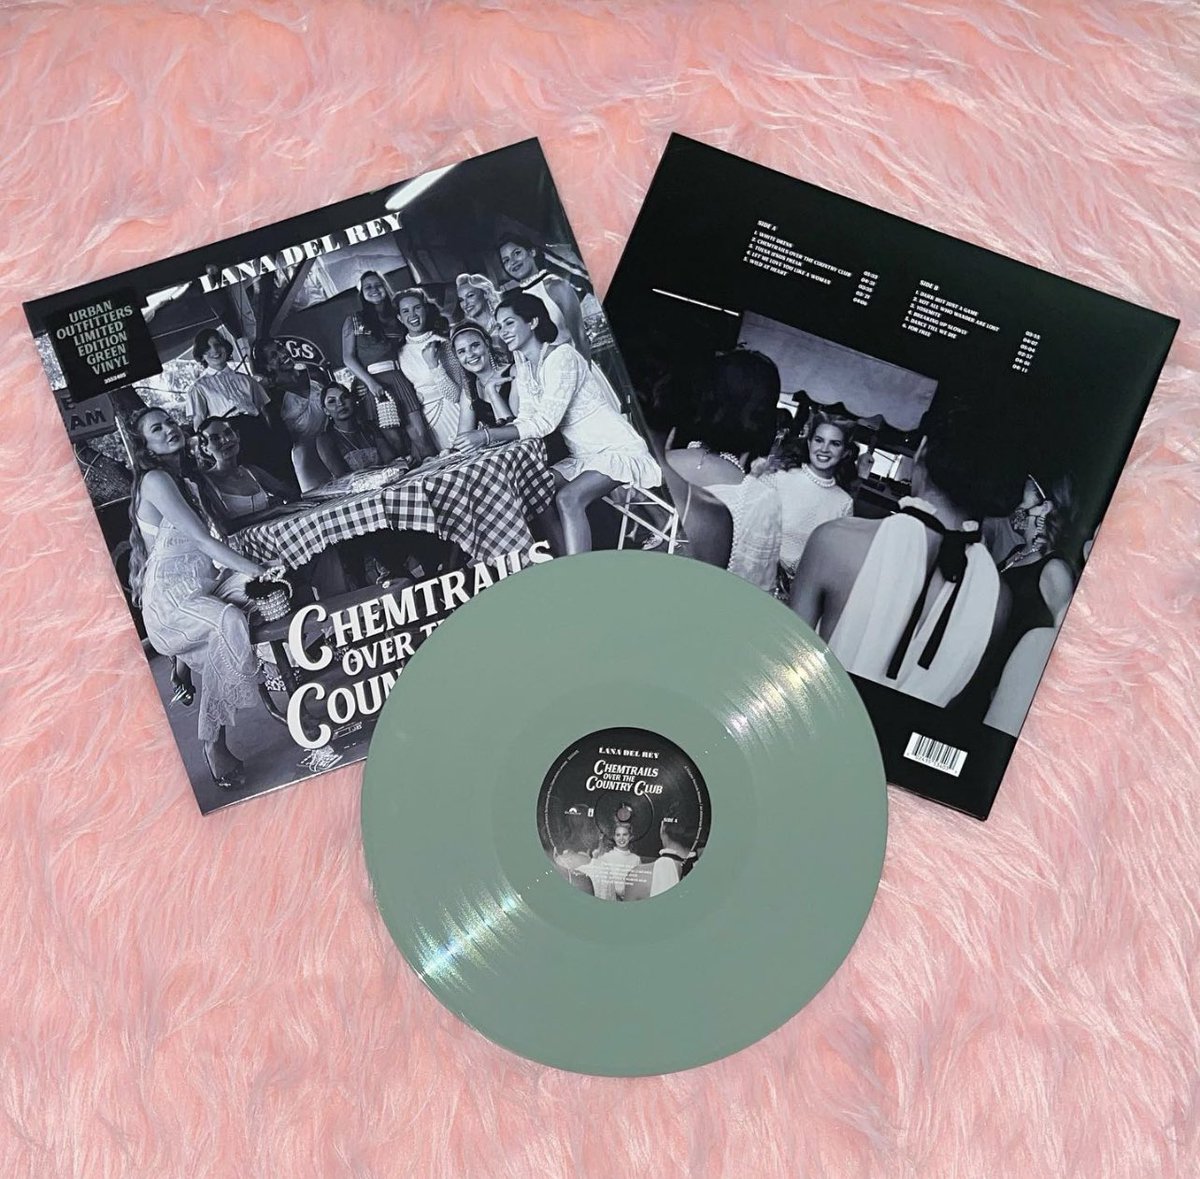  Lana Del Rey- Chemtrails Over the Country Club - Limited  Edition Green Vinyl: CDs y Vinilo